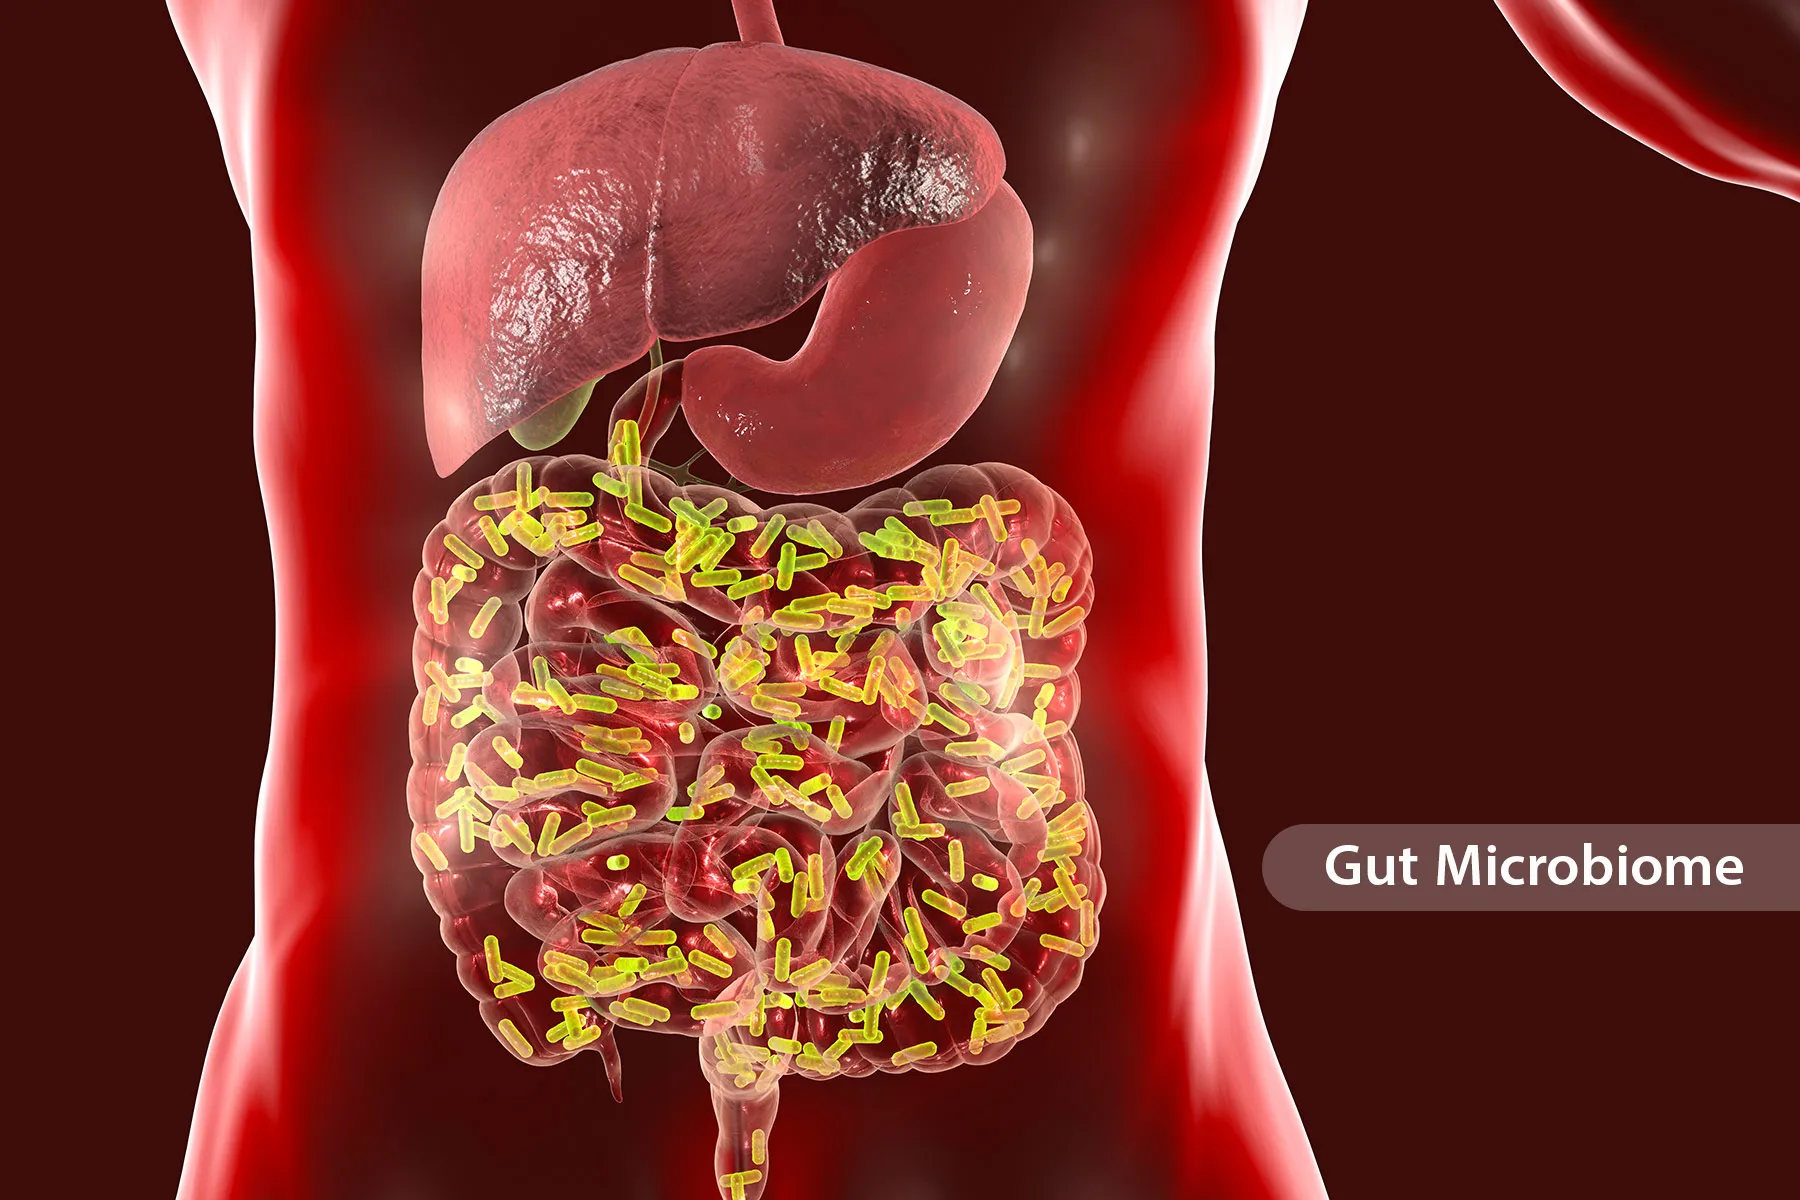 Gut Microbiome Changes Throughout the Day and With the Seasons